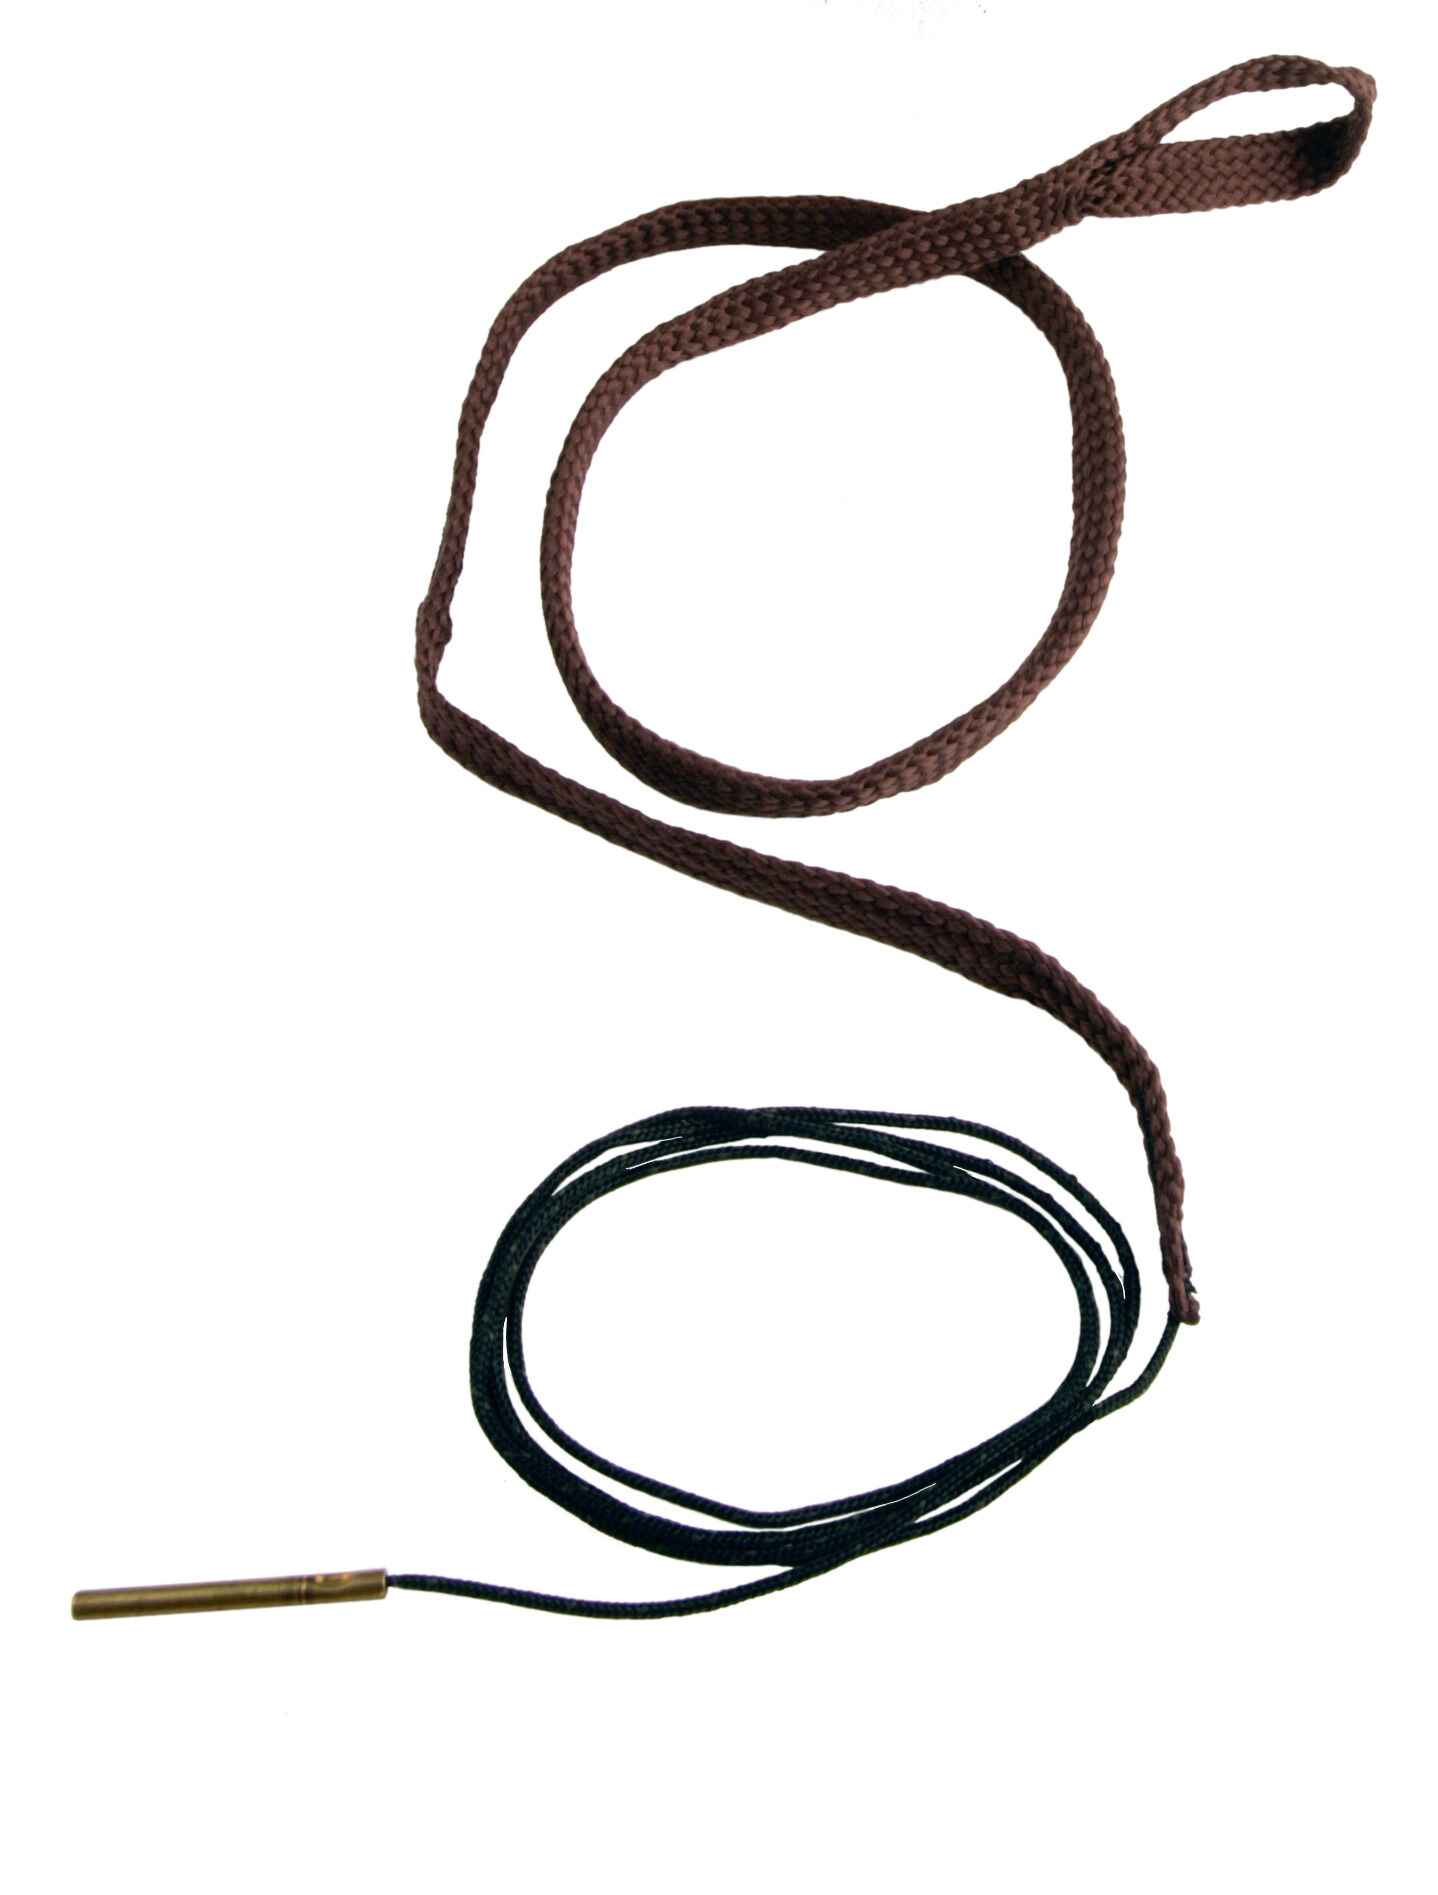 Hoppes .17HMR .17cal Rifle Barrel Bore Snake Cleaning Pull Through 